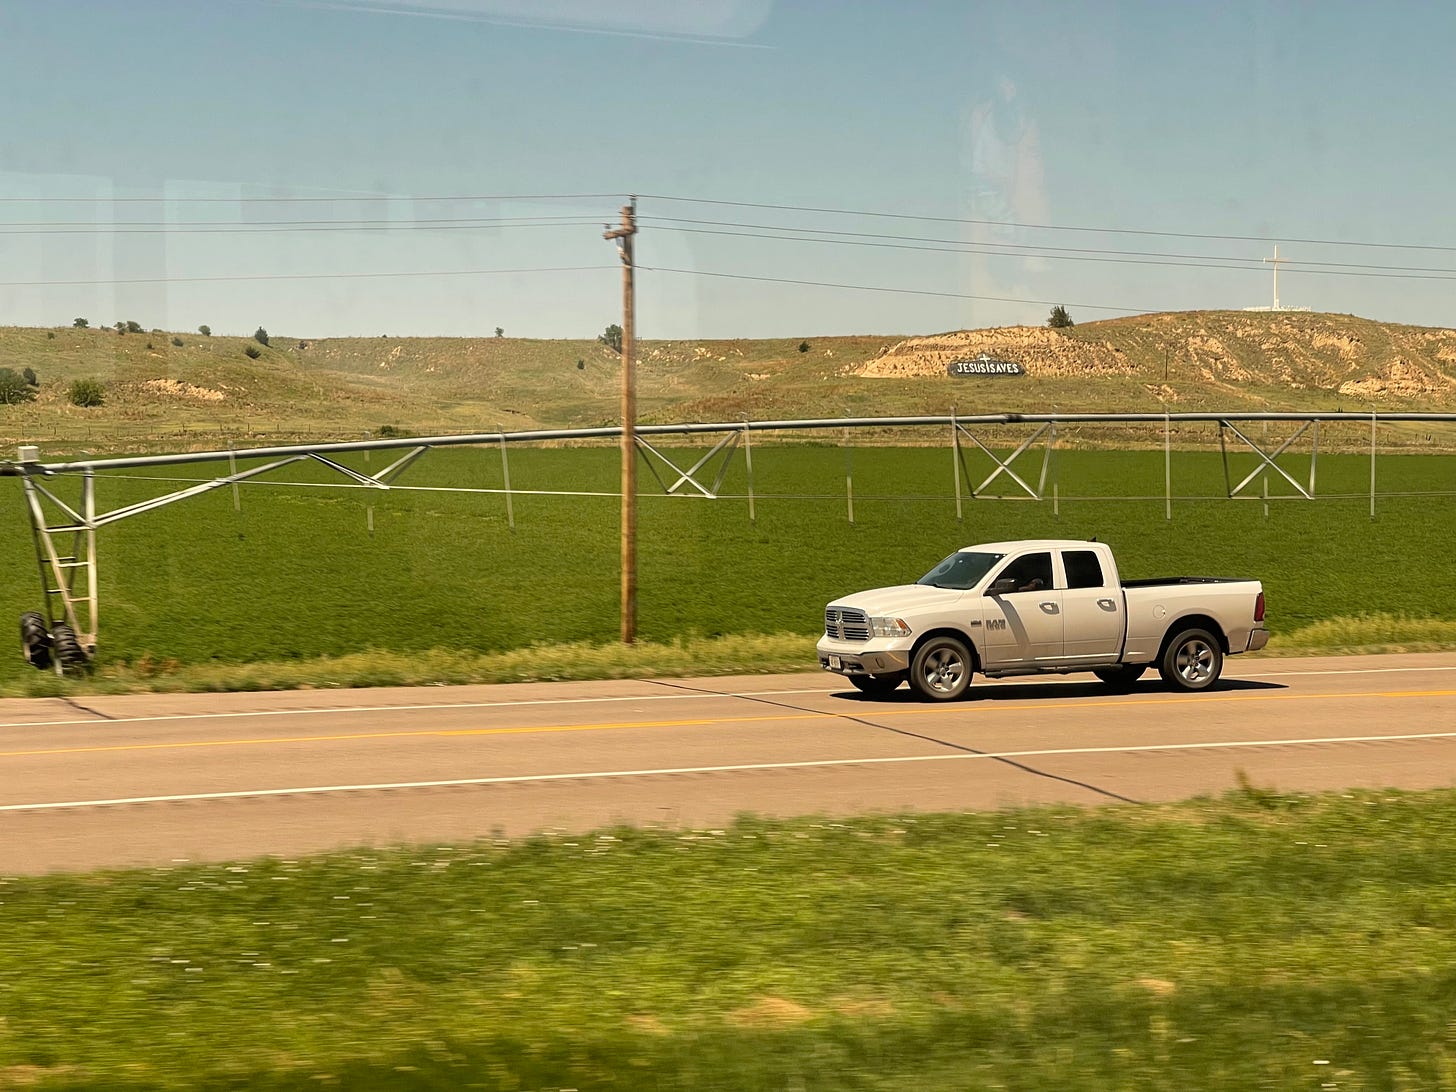 a highway in rural Colorado, with a white Ram truck. an irrigation boom spans a planted field. “Jesus Saves” is painted in large white letters on a hill in the background.